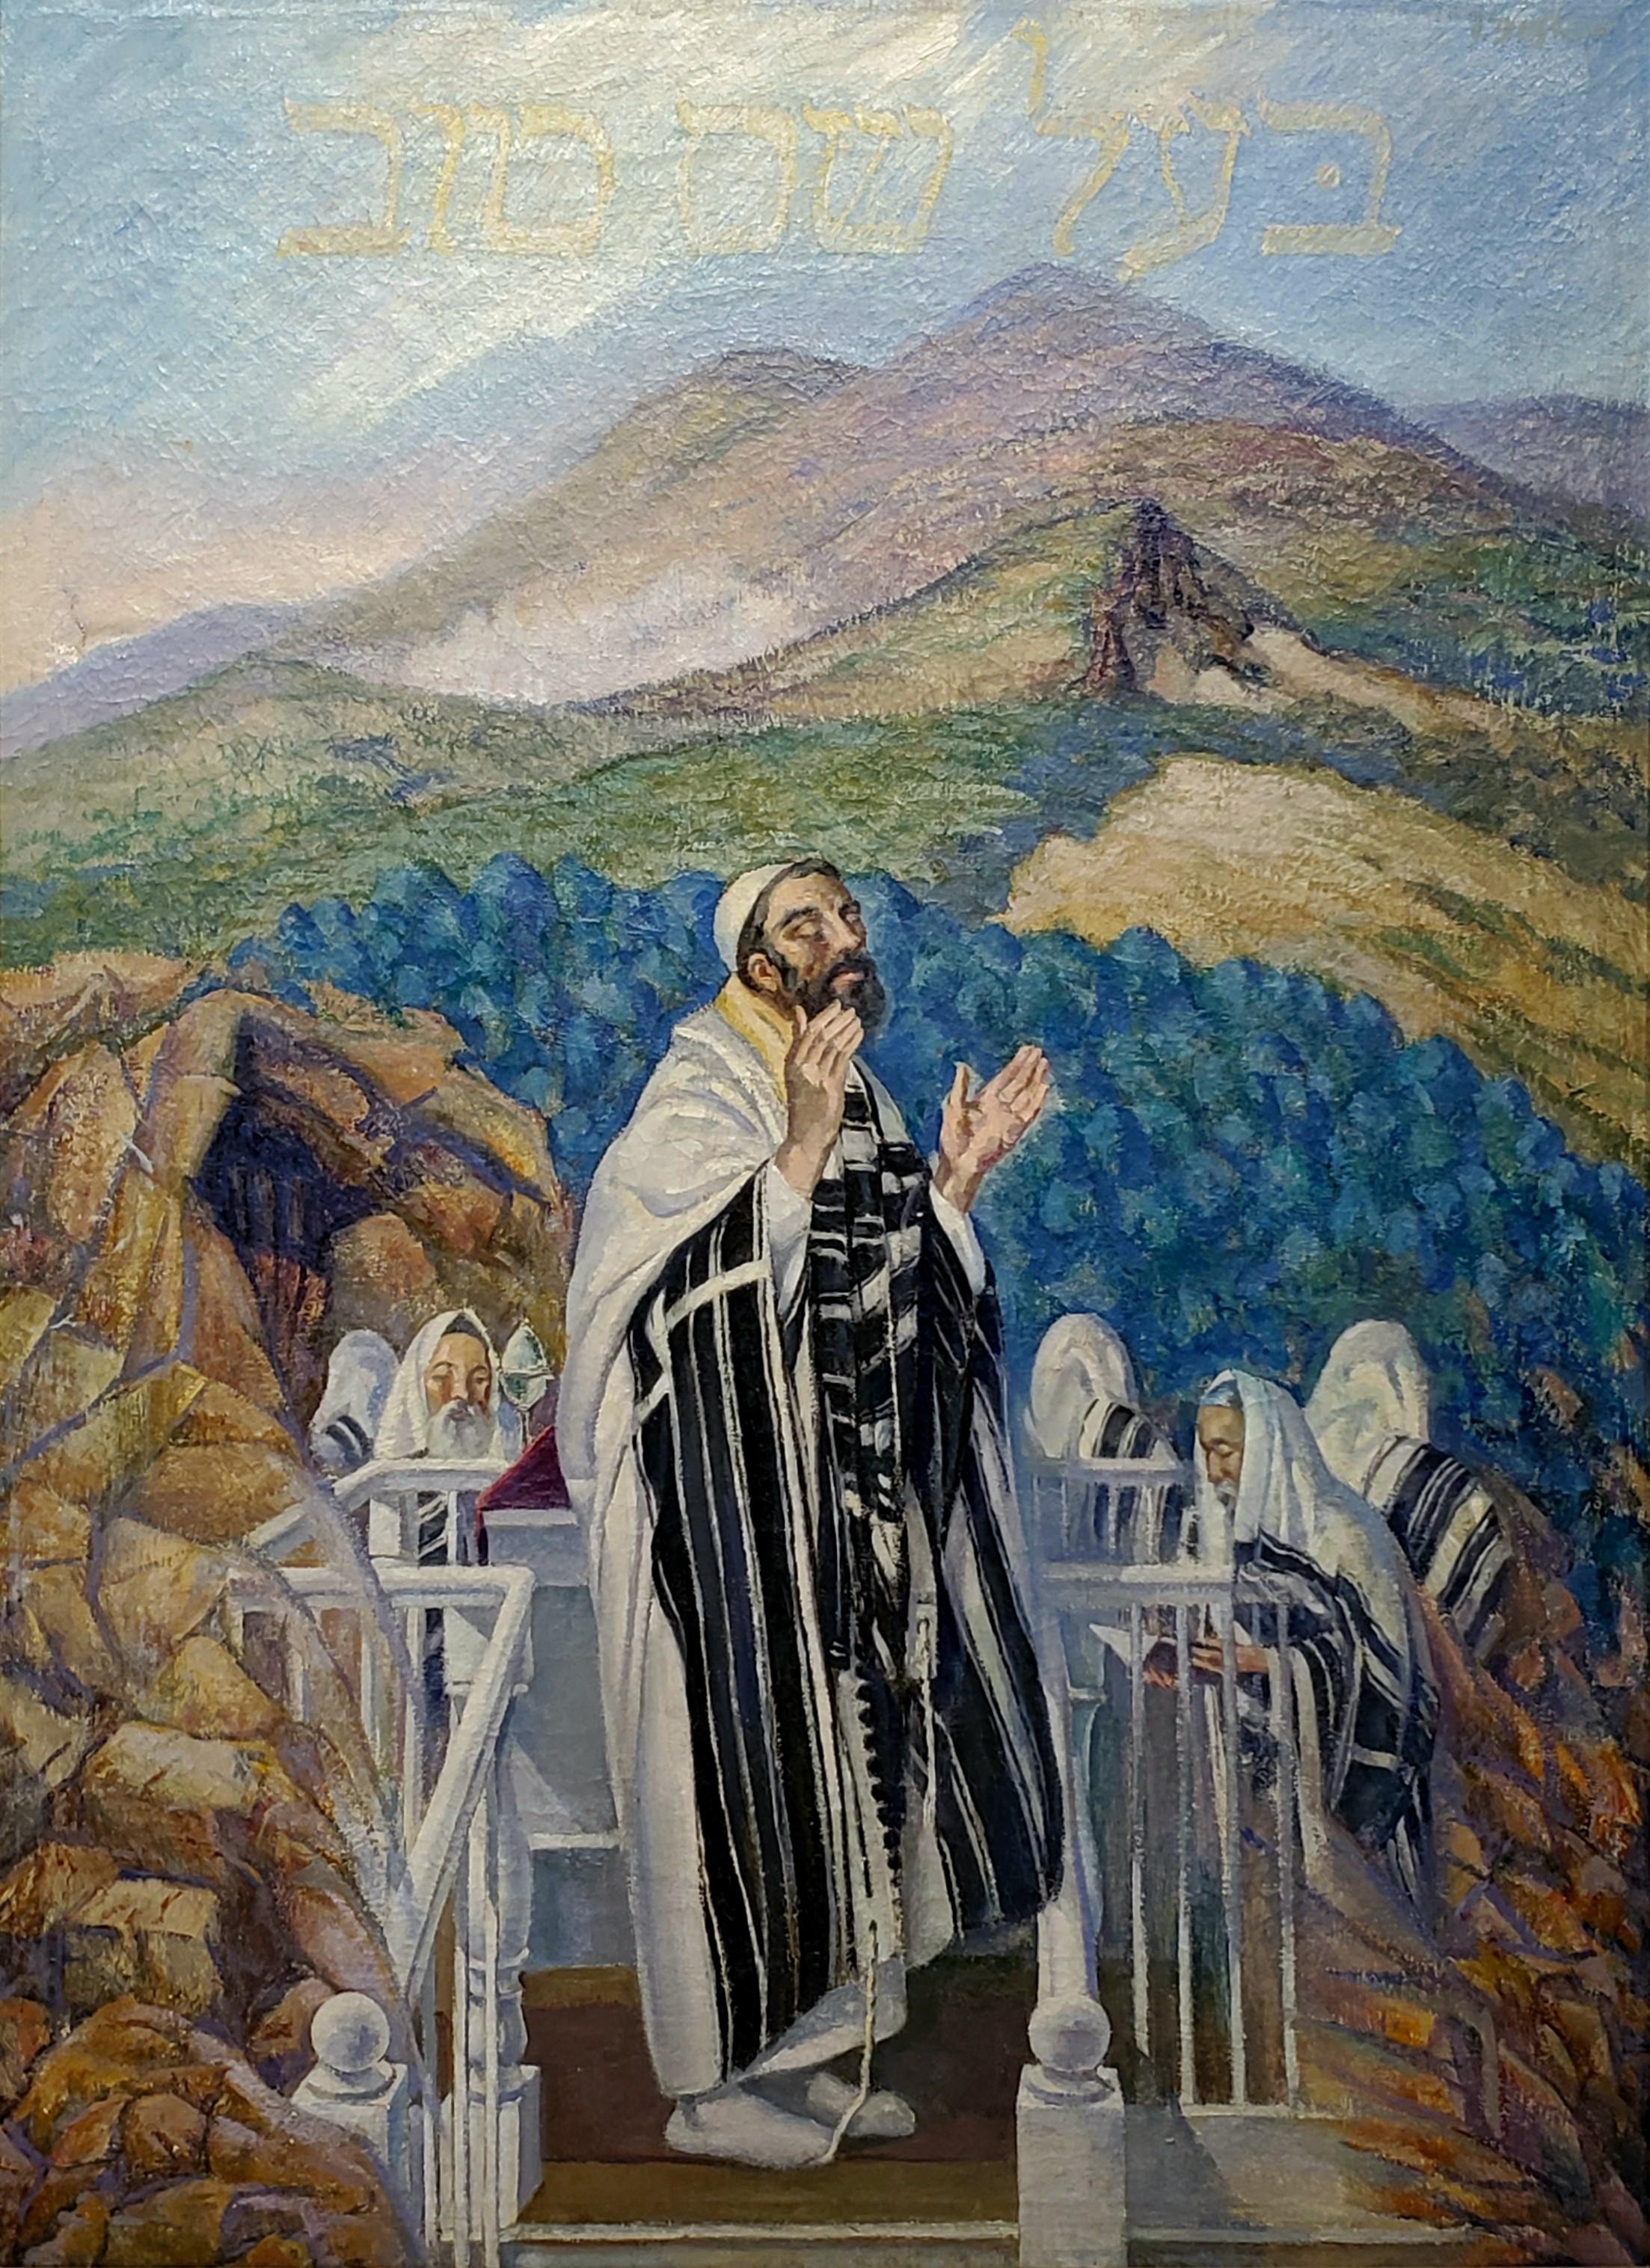 Ba'al Shem Tov Leading Prayer On A Top of a Mountain - Painting by Israel Doskow